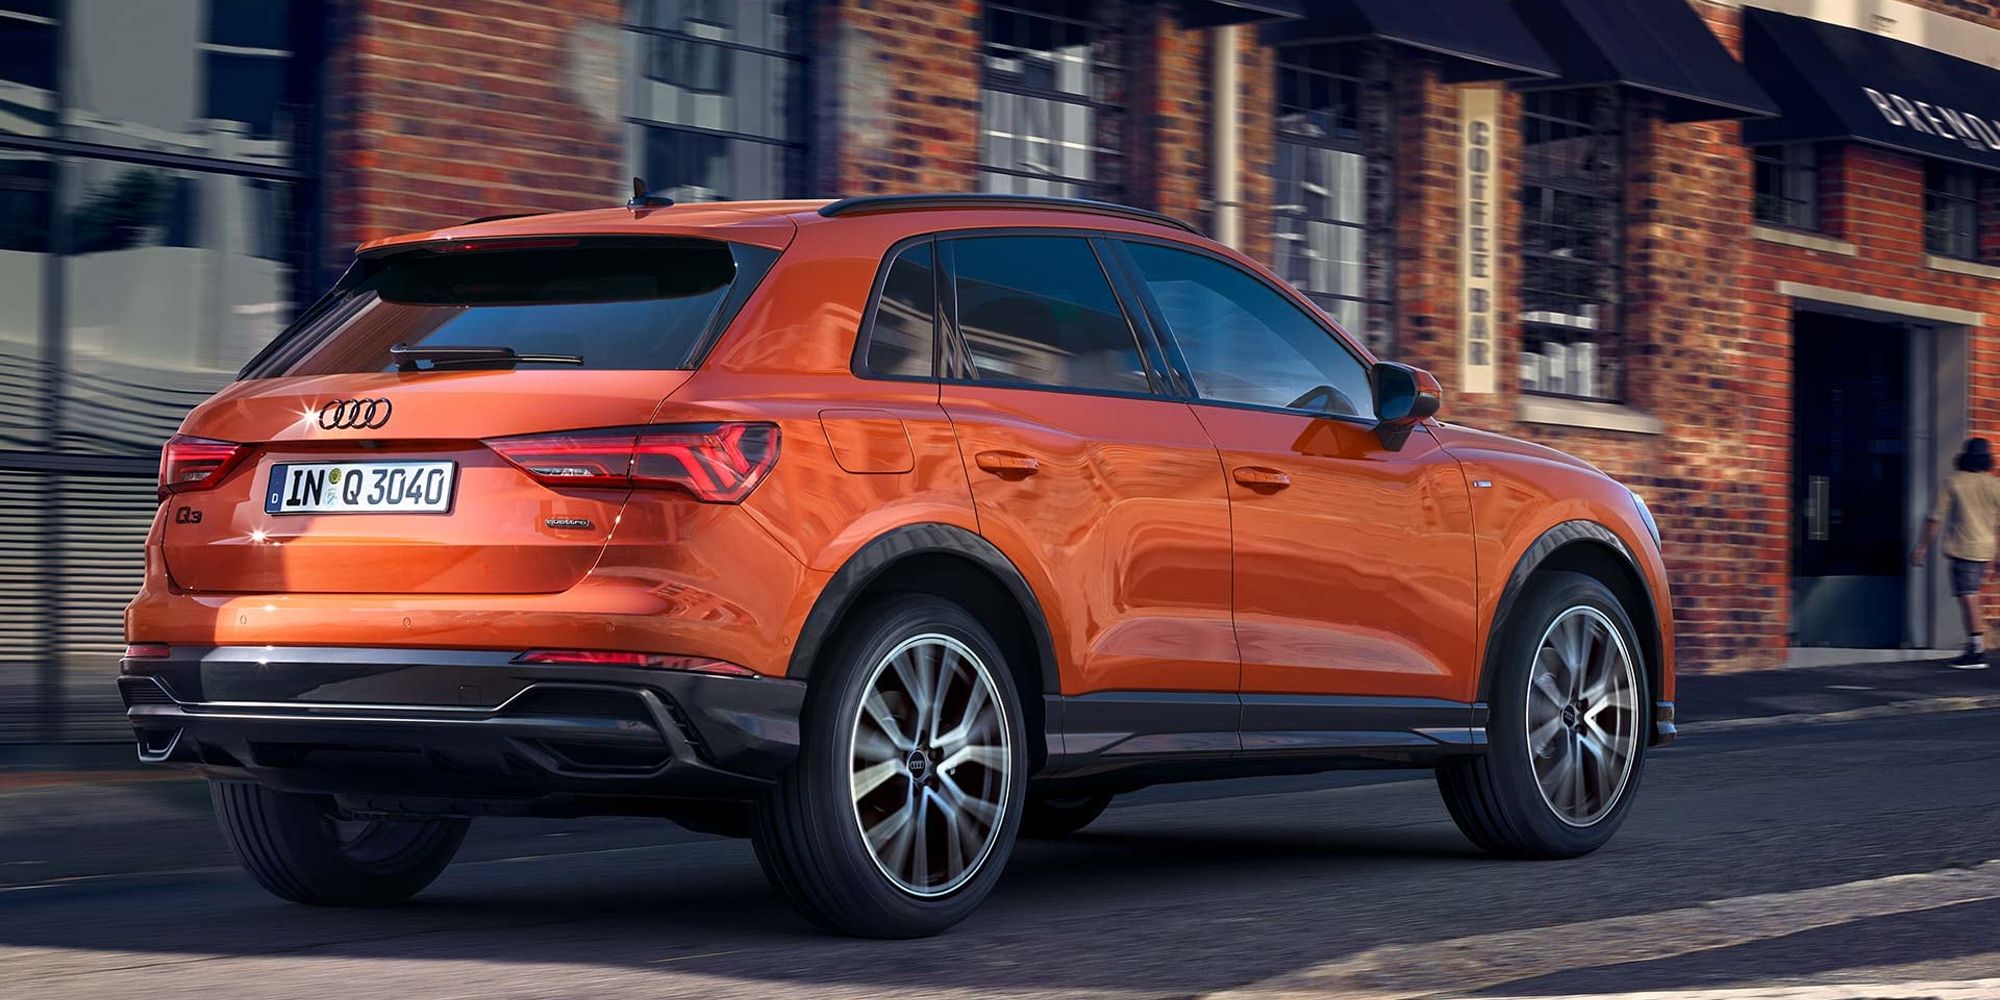 The facelifted Q3 in orange